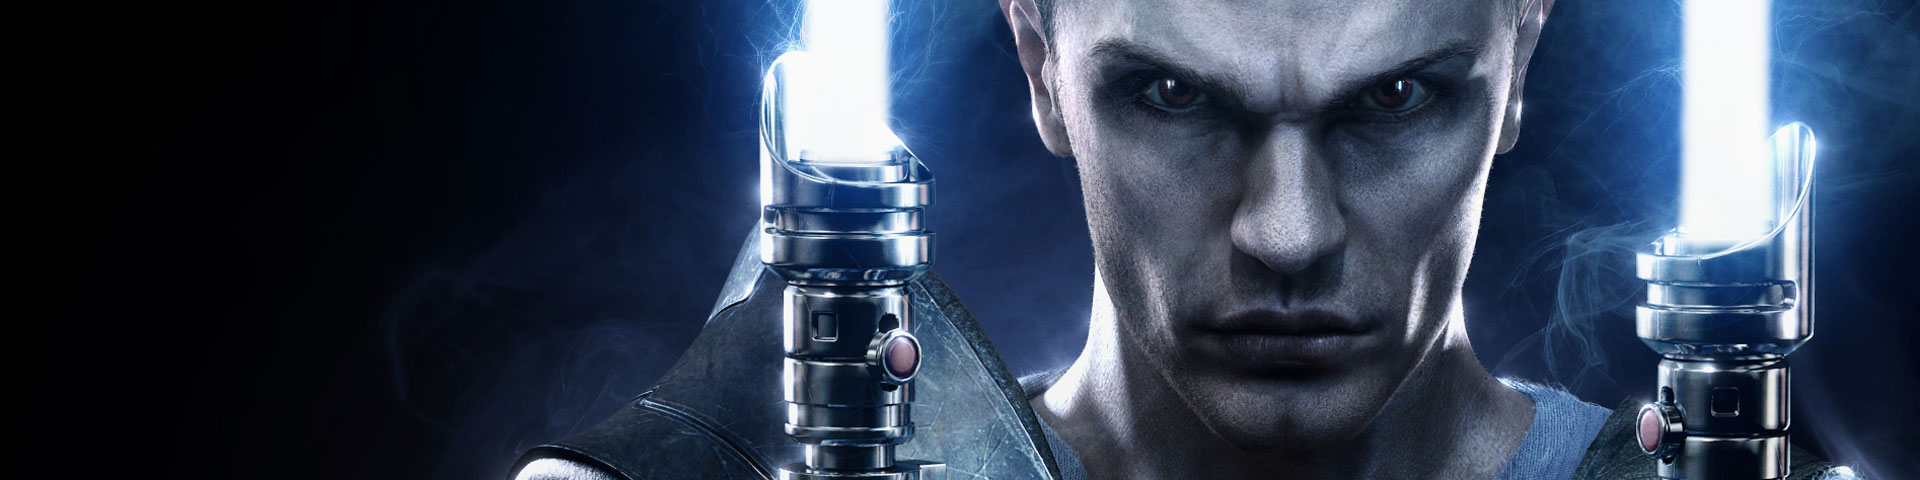 A close-up view of Starkiller, with two blue-white lightsabers held up to either side of his face.